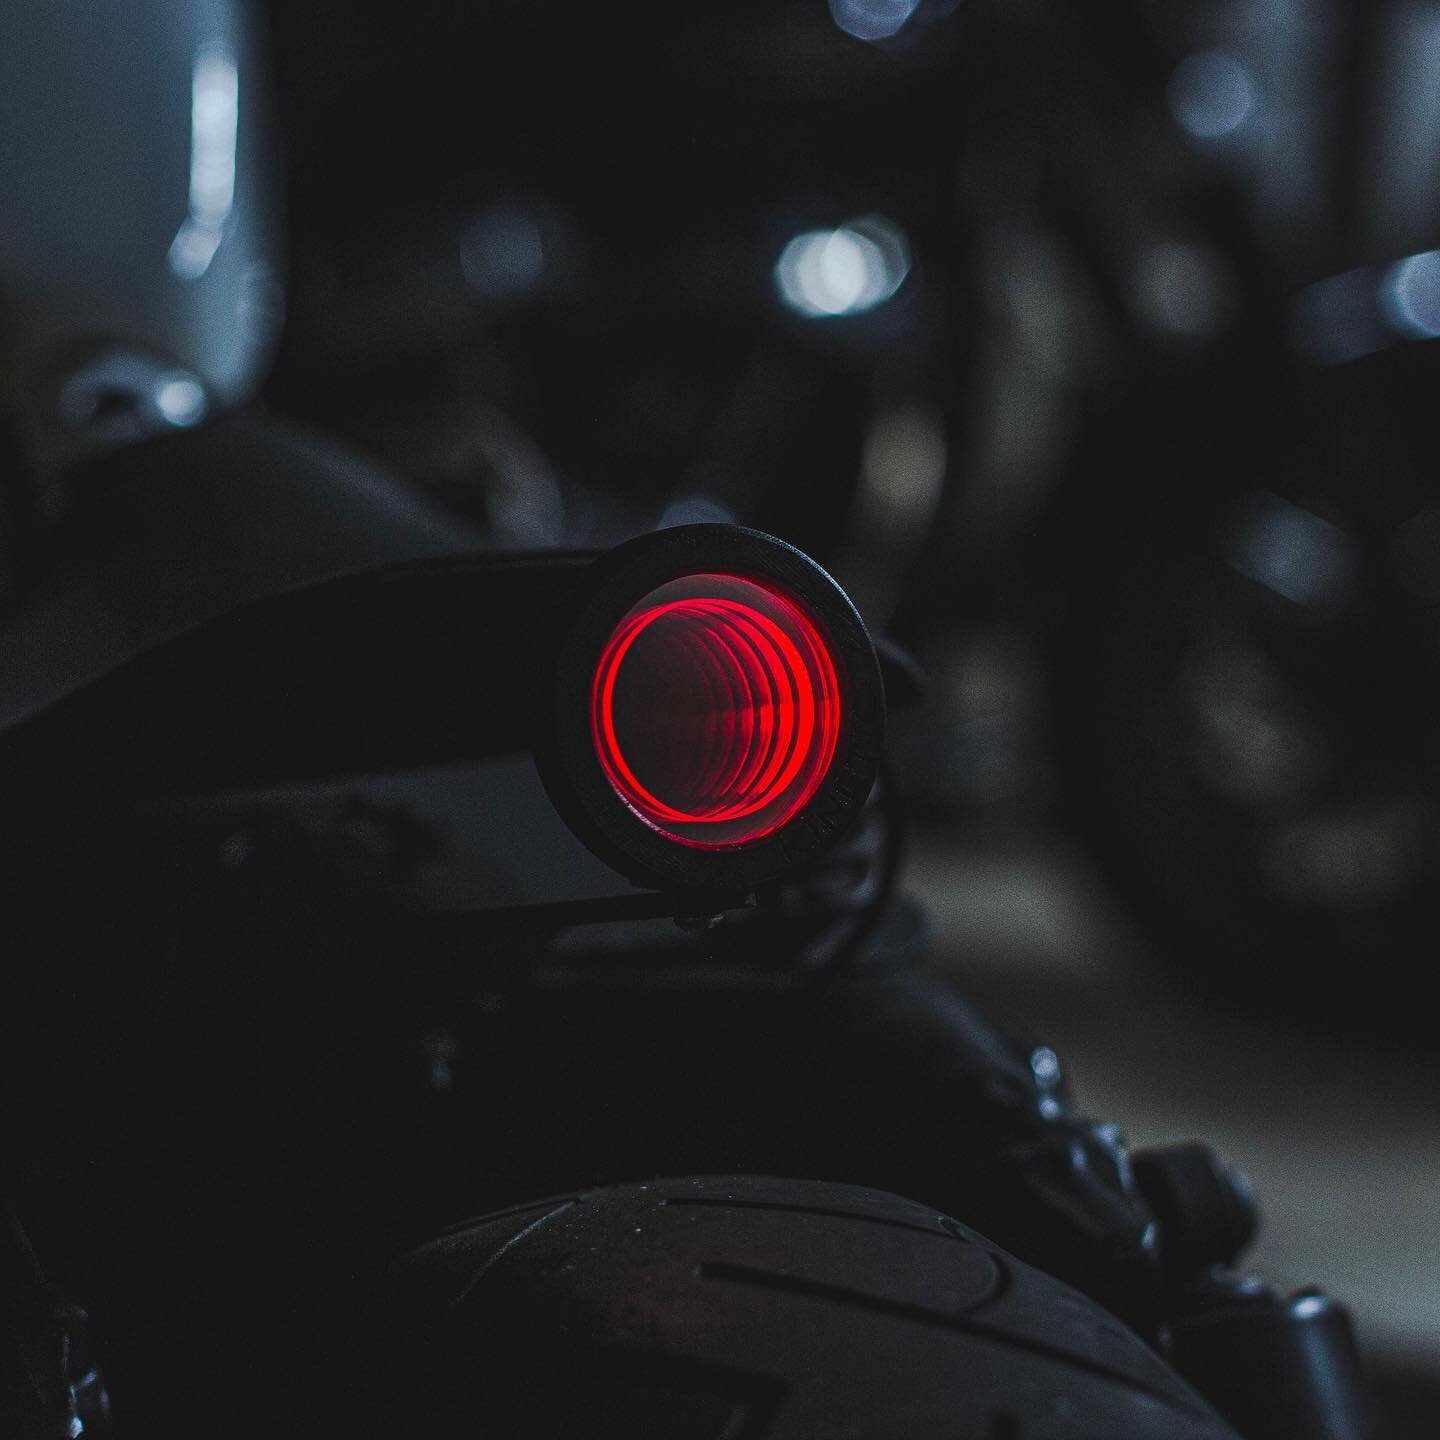 Introducing: The Portal Infinity Tail Light

Bringing something new to the lineup. Can be OEM fender mounted or a floating arm kit for the chopped fender people. 

Video in last slide! Worldwide shipping. Free USA and Canada shipping.